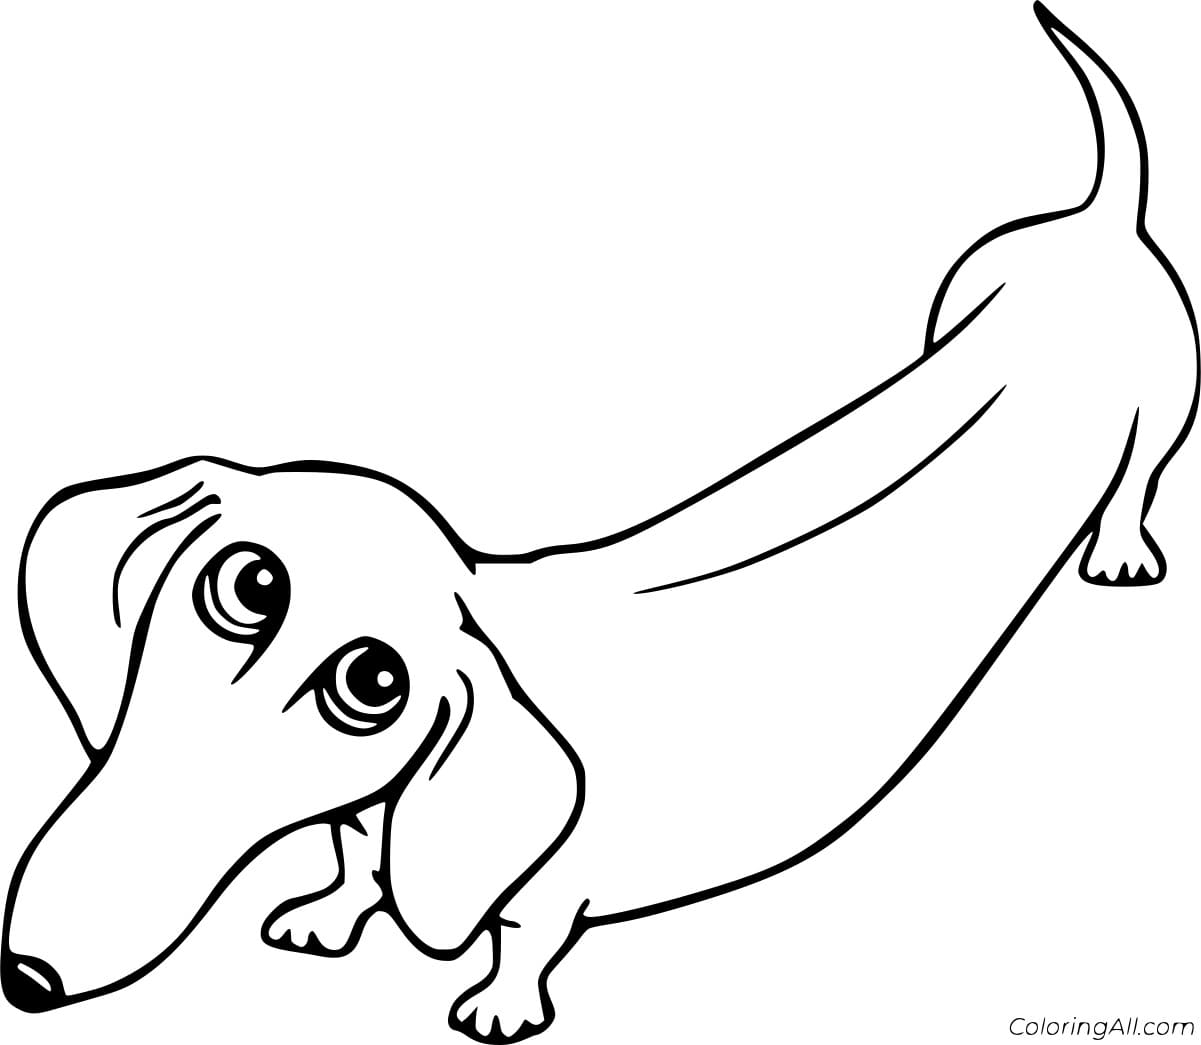 Fat Dachshund Free Printable Coloring Page